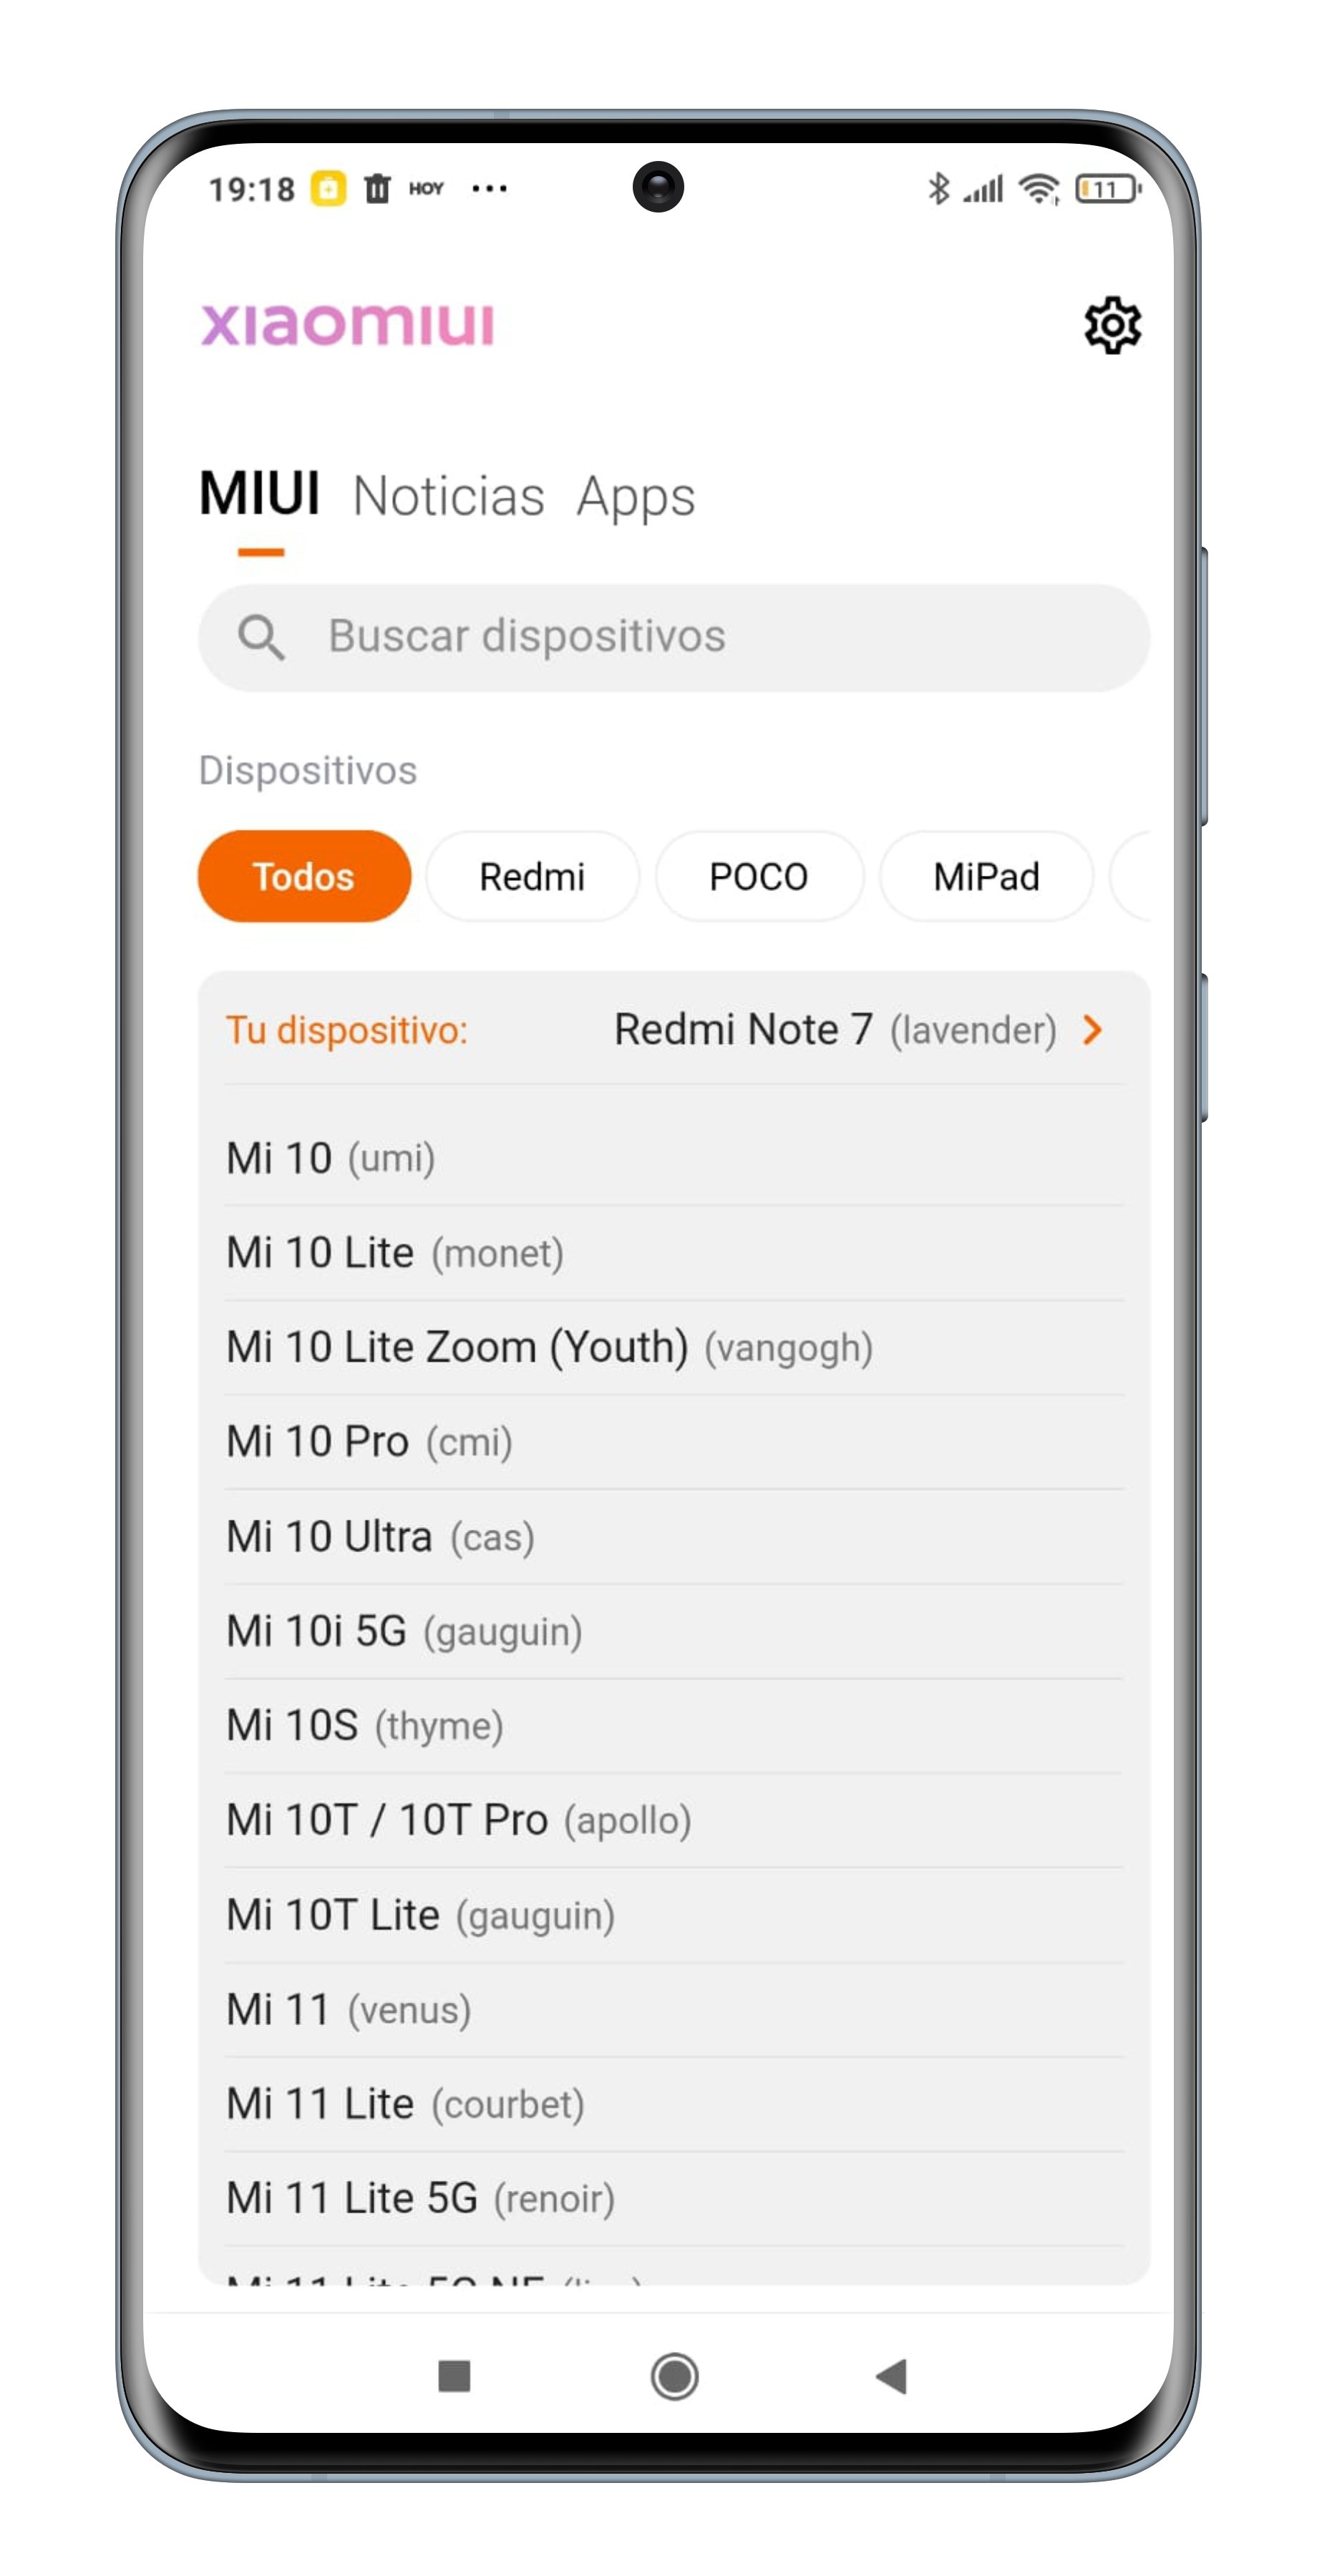 How to download custom ROMs to update your Xiaomi Mobile in an easy way